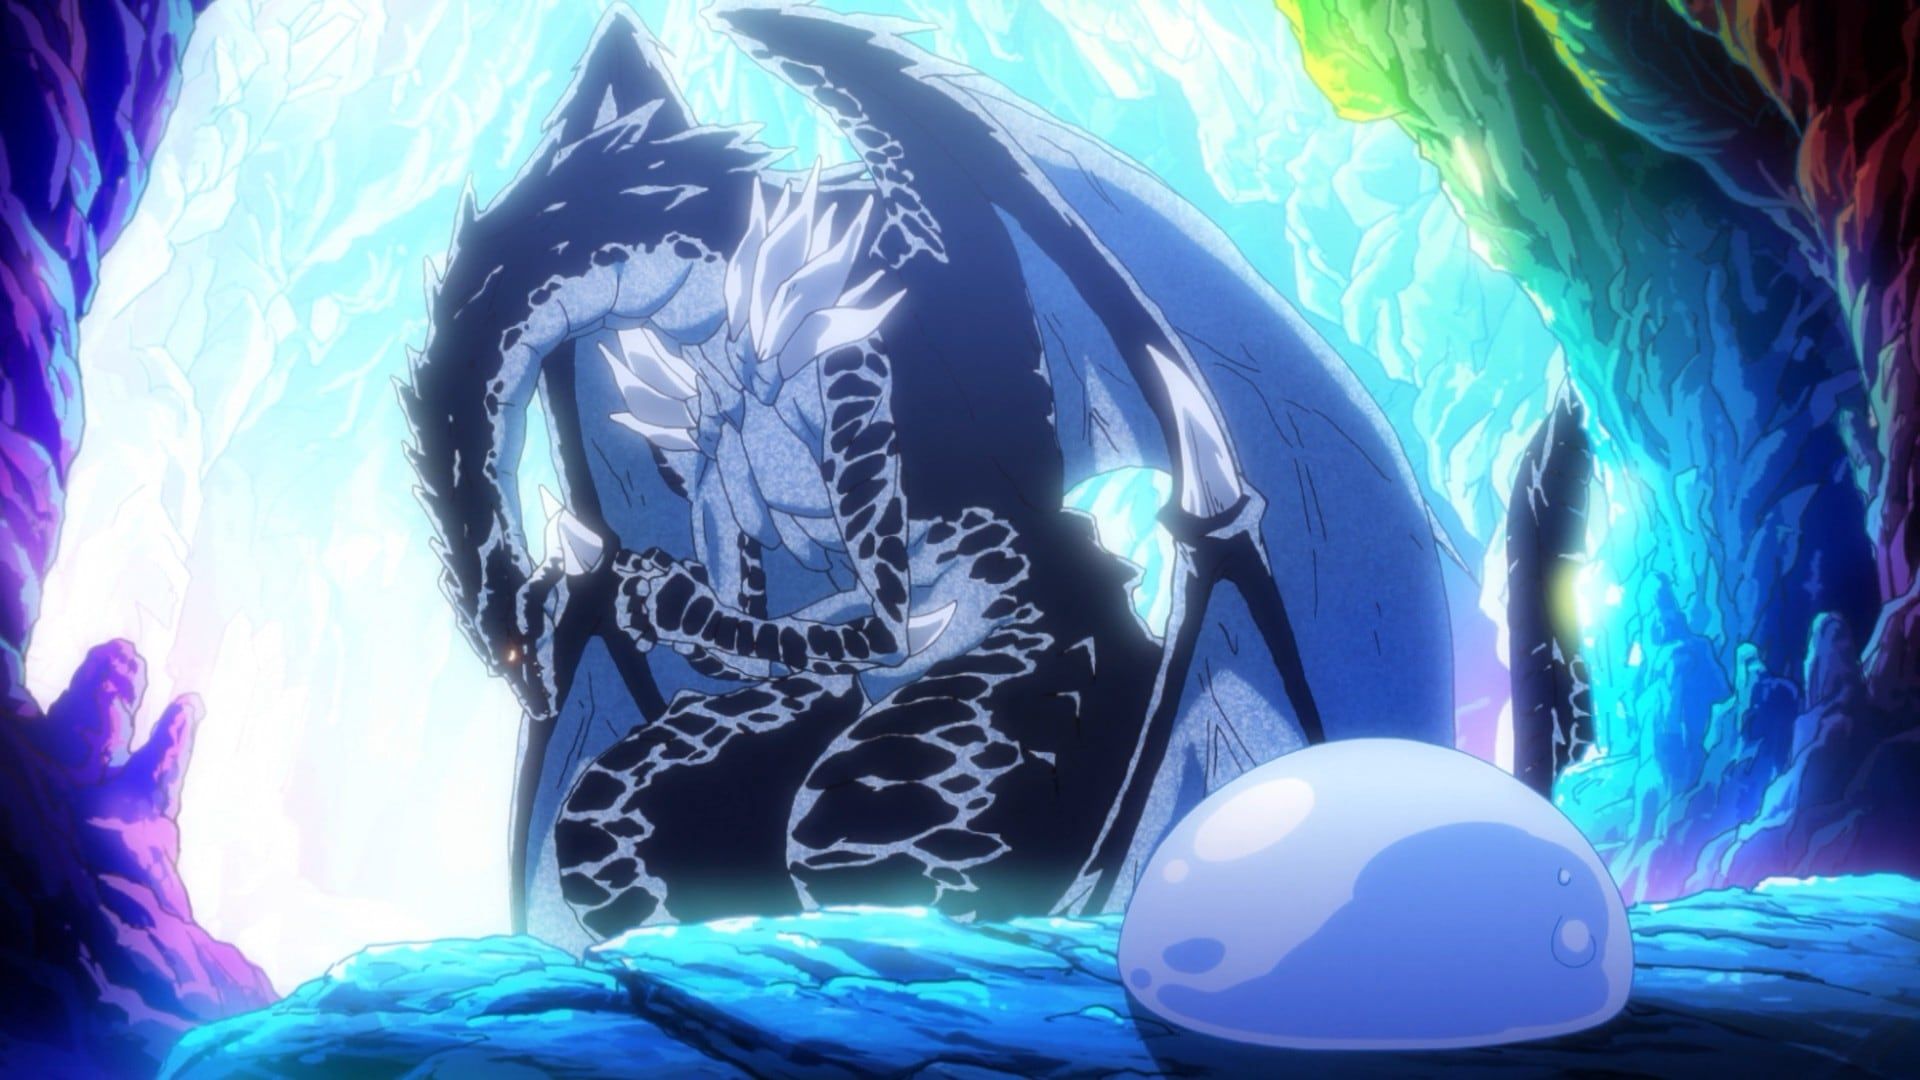 That Time I Got Reincarnated as a Slime background